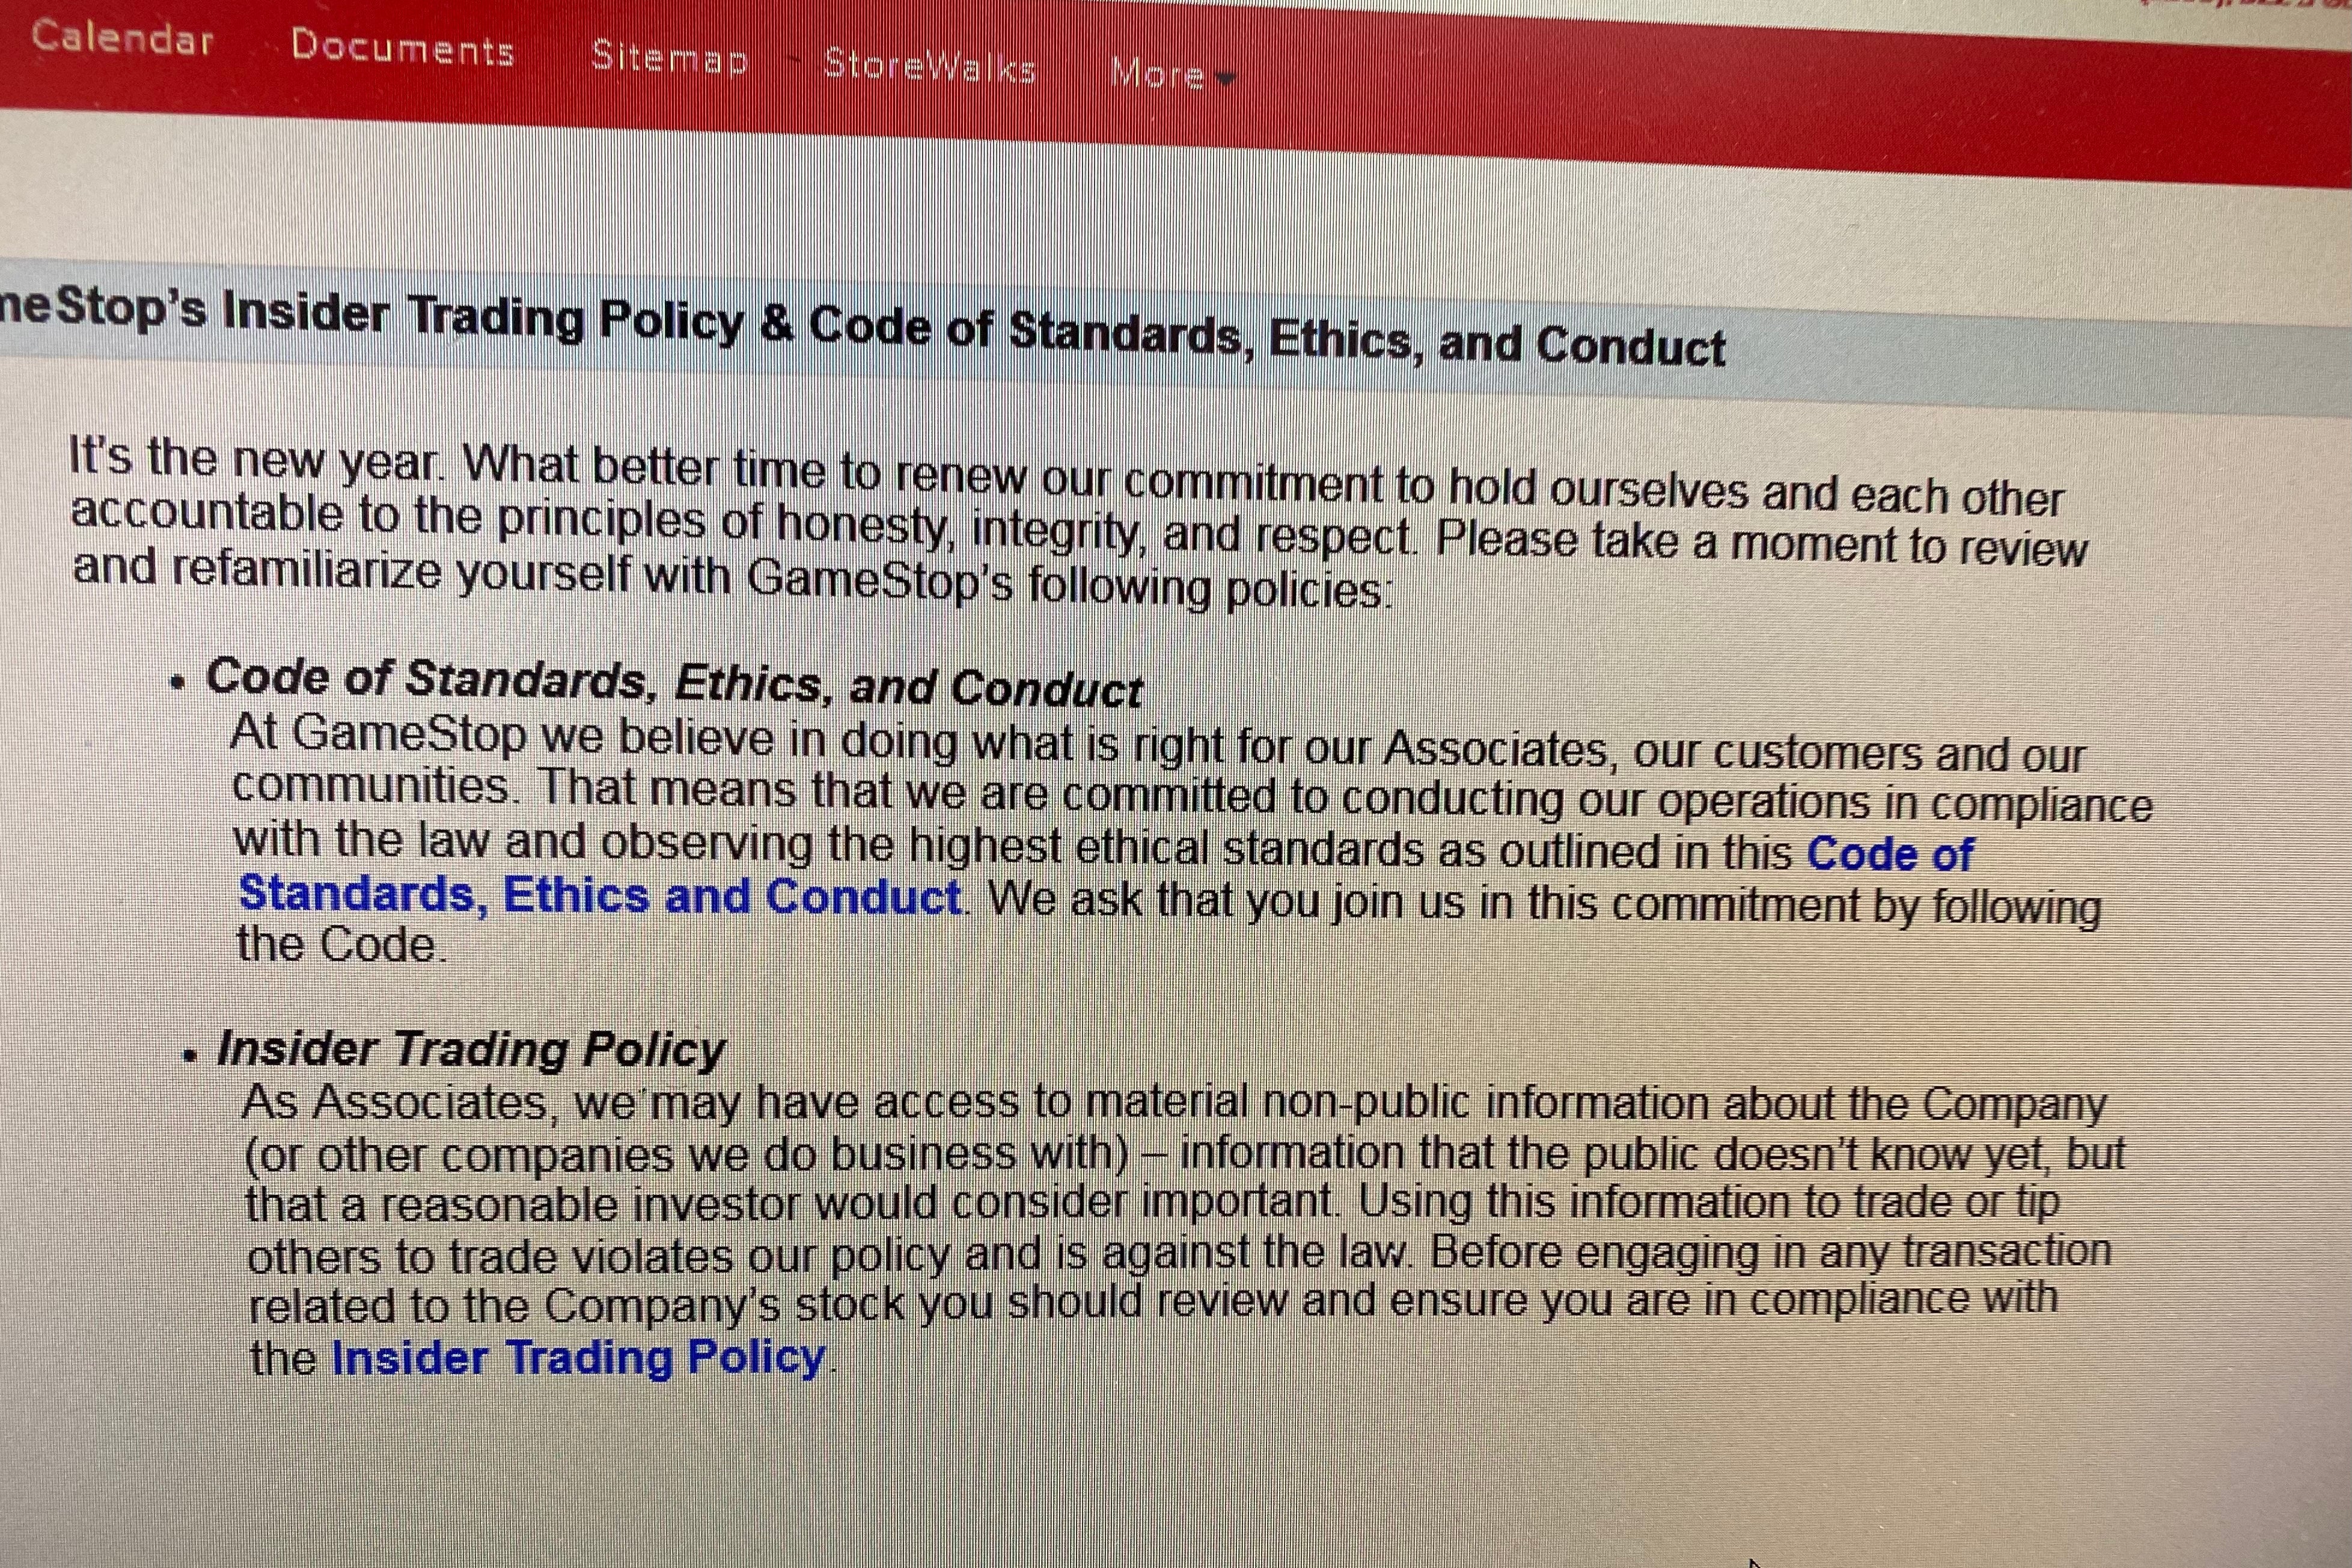 A screenshot of a memo outlining GameStop's insider trading policy.